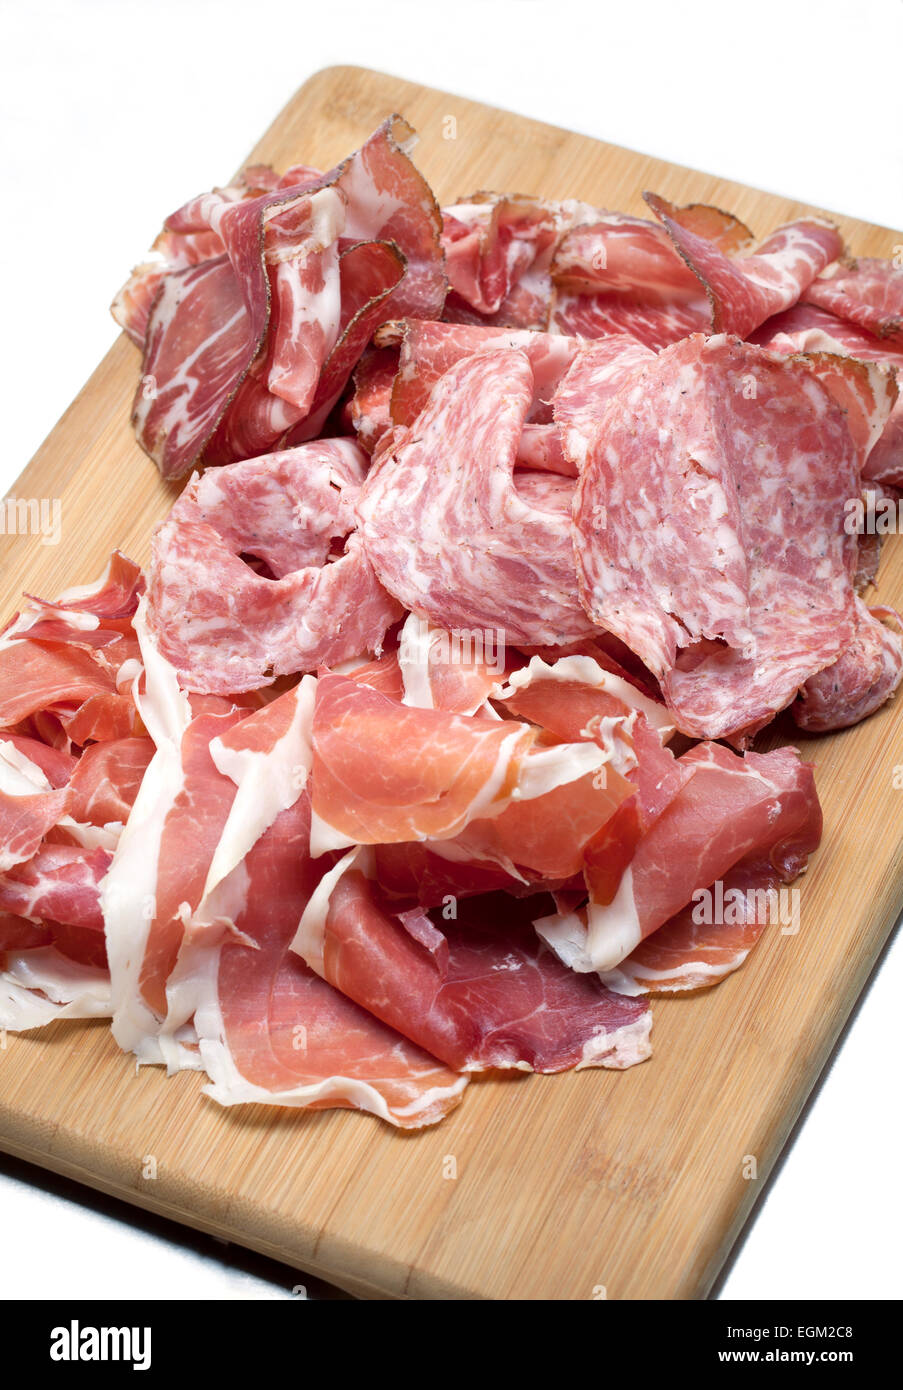 Charcuterie Platter of a  selection of Sliced Italian Meat Stock Photo